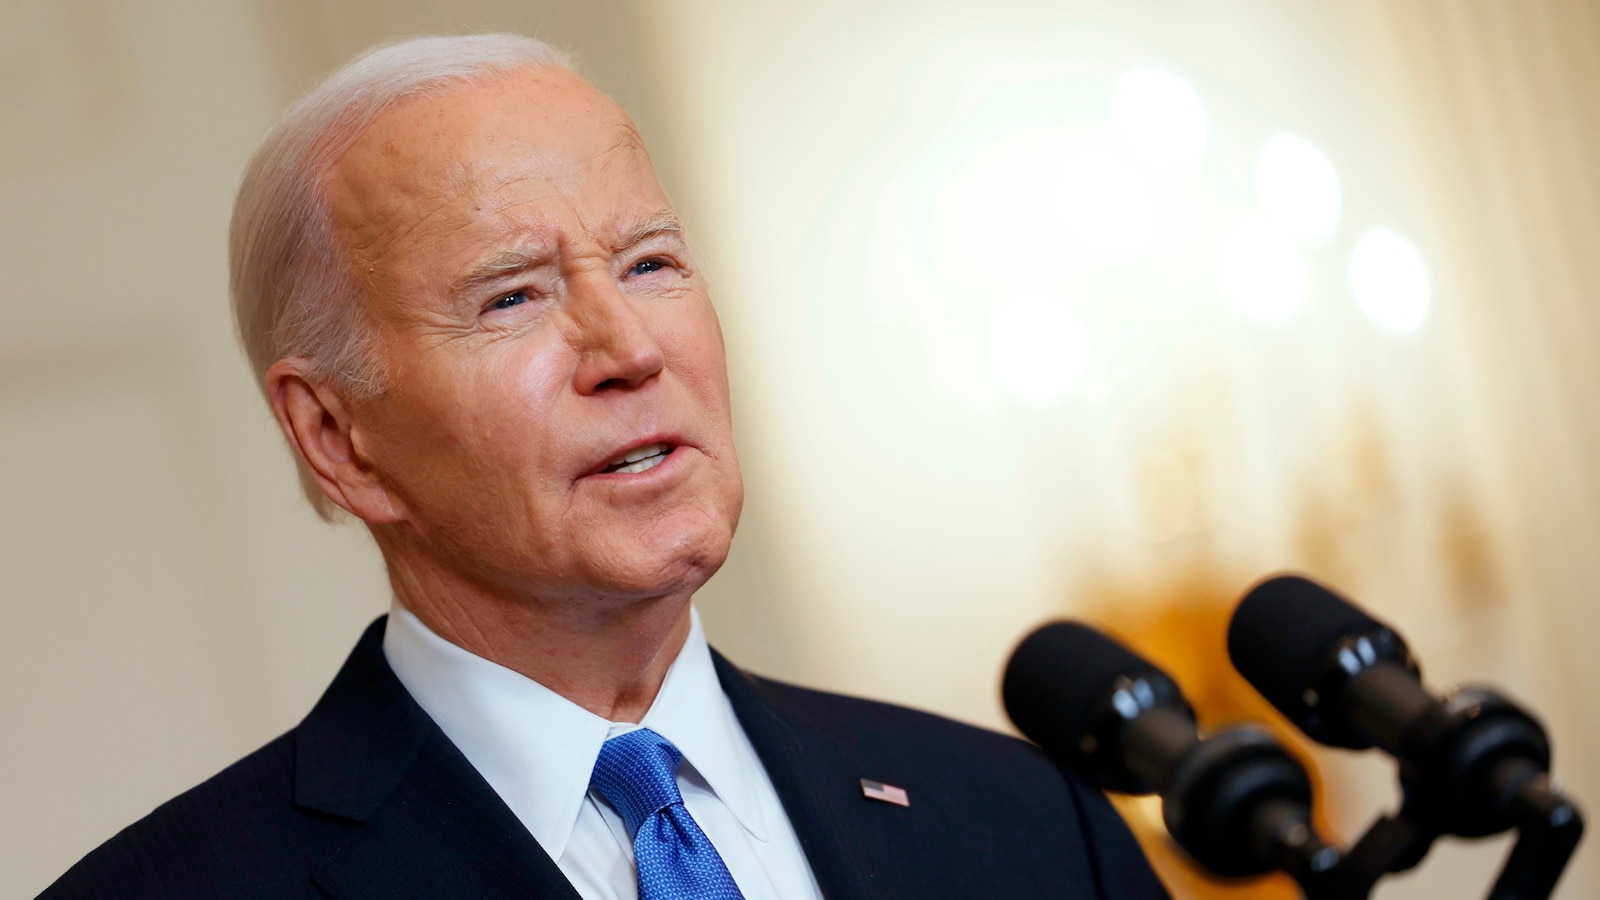 Transcript from documents probe contradicts Biden’s account of exchange with Hur over son’s death [Video]